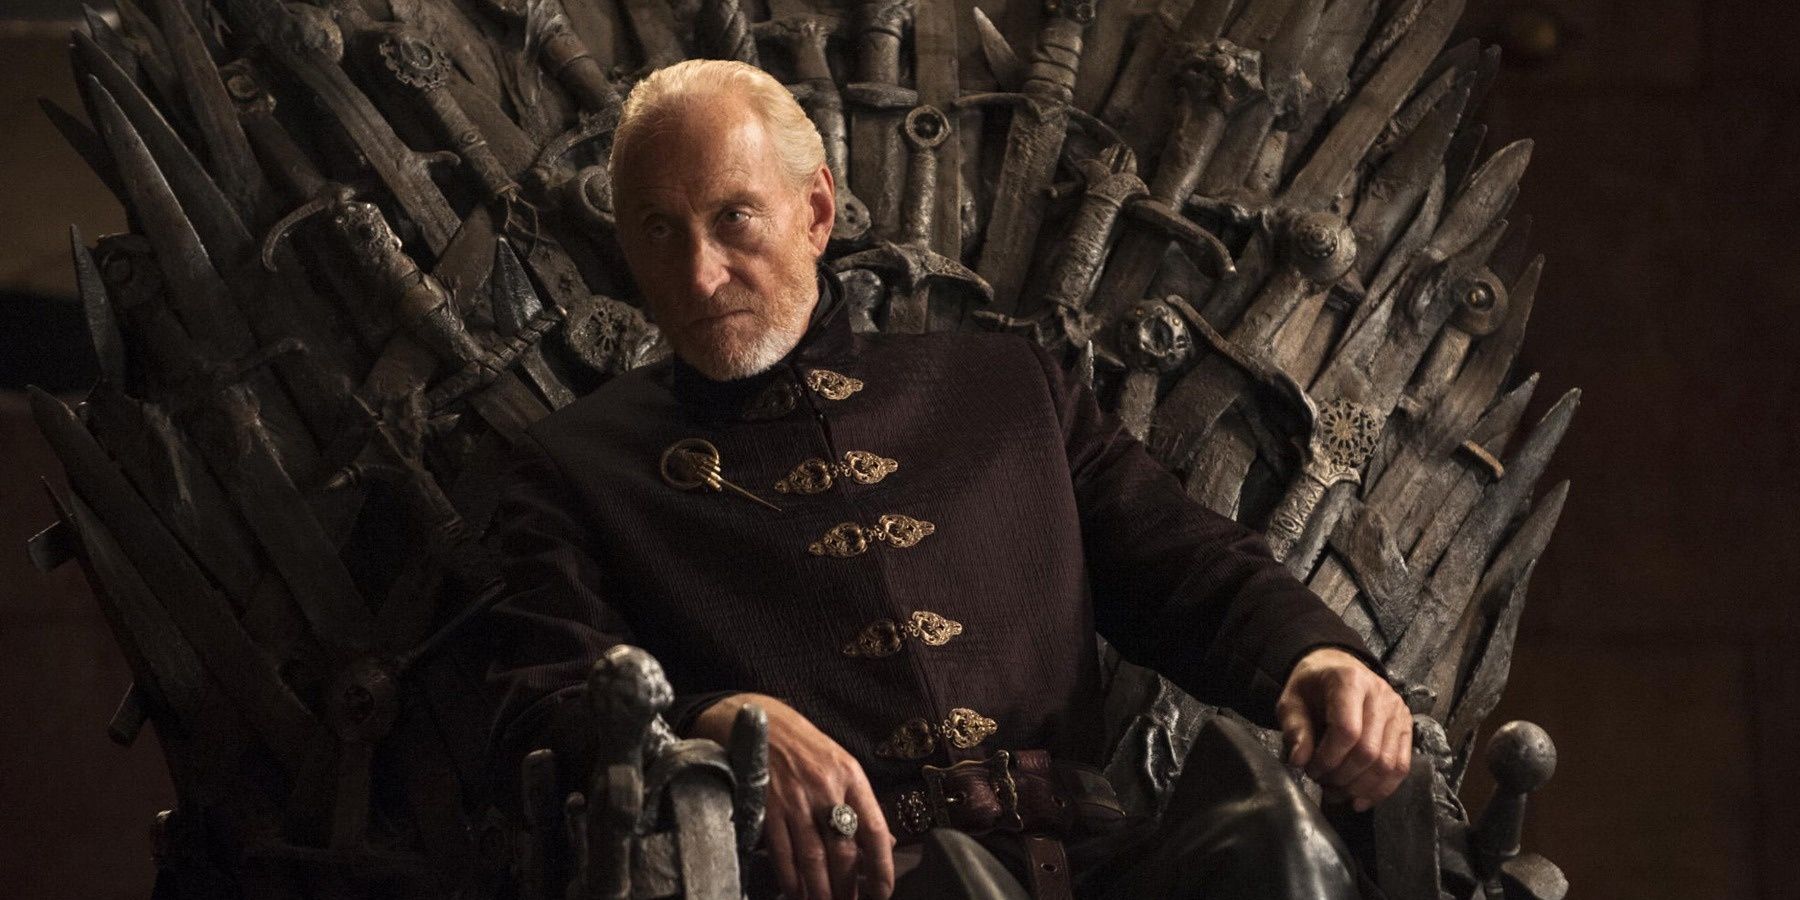 Tywin Lannister on the Iron Throne